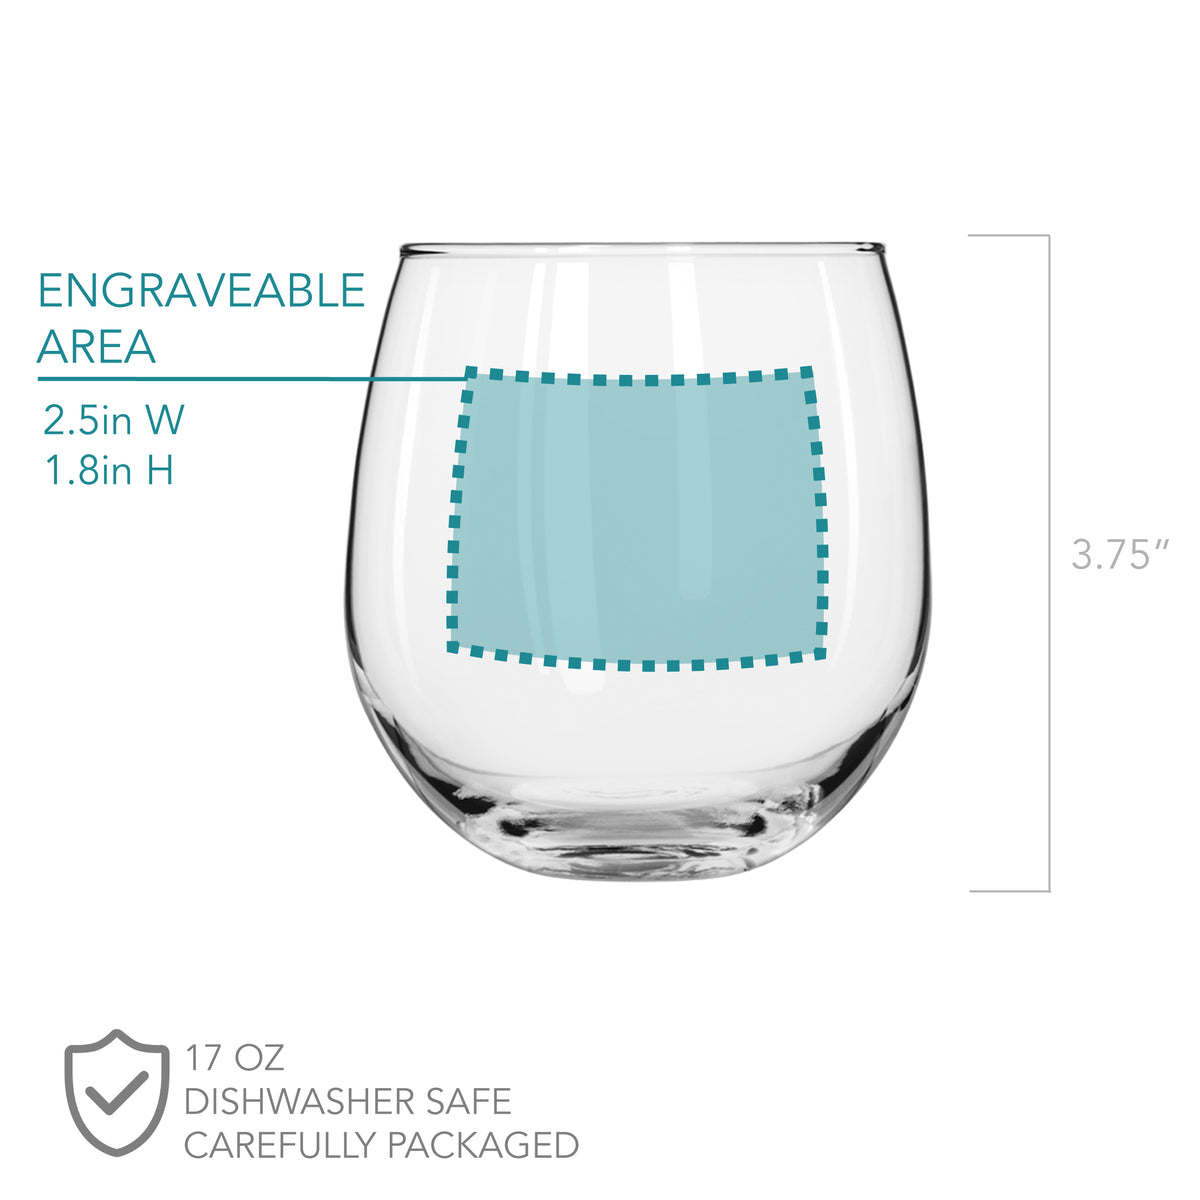 Etched Stemless White Wine Glass Retirement - Design: RETIRED